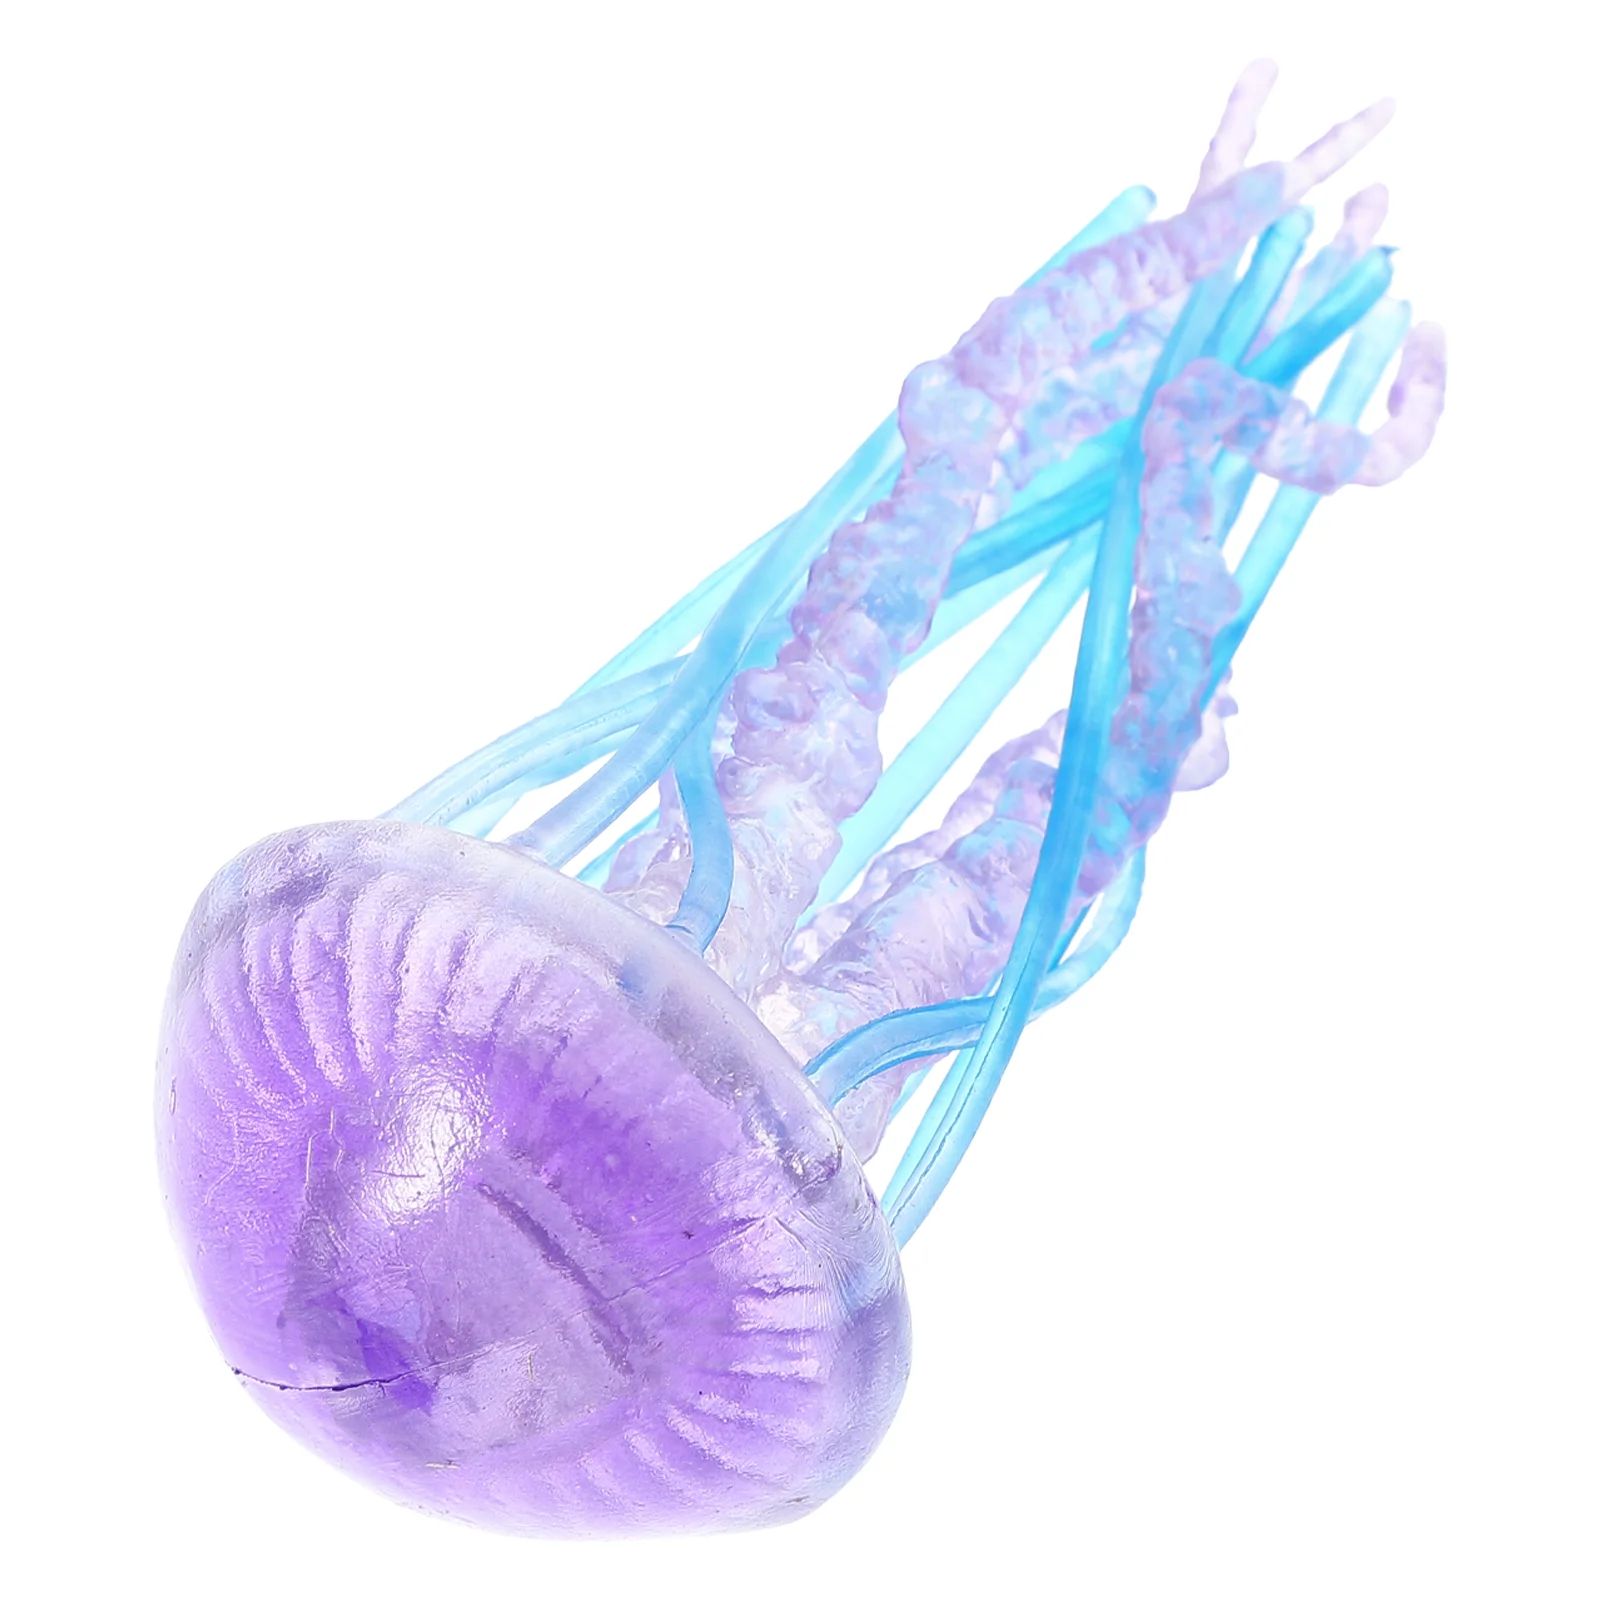 

Possible output: "Realistic Jellyfish Figurine Simulated Sea Life Animals Models"